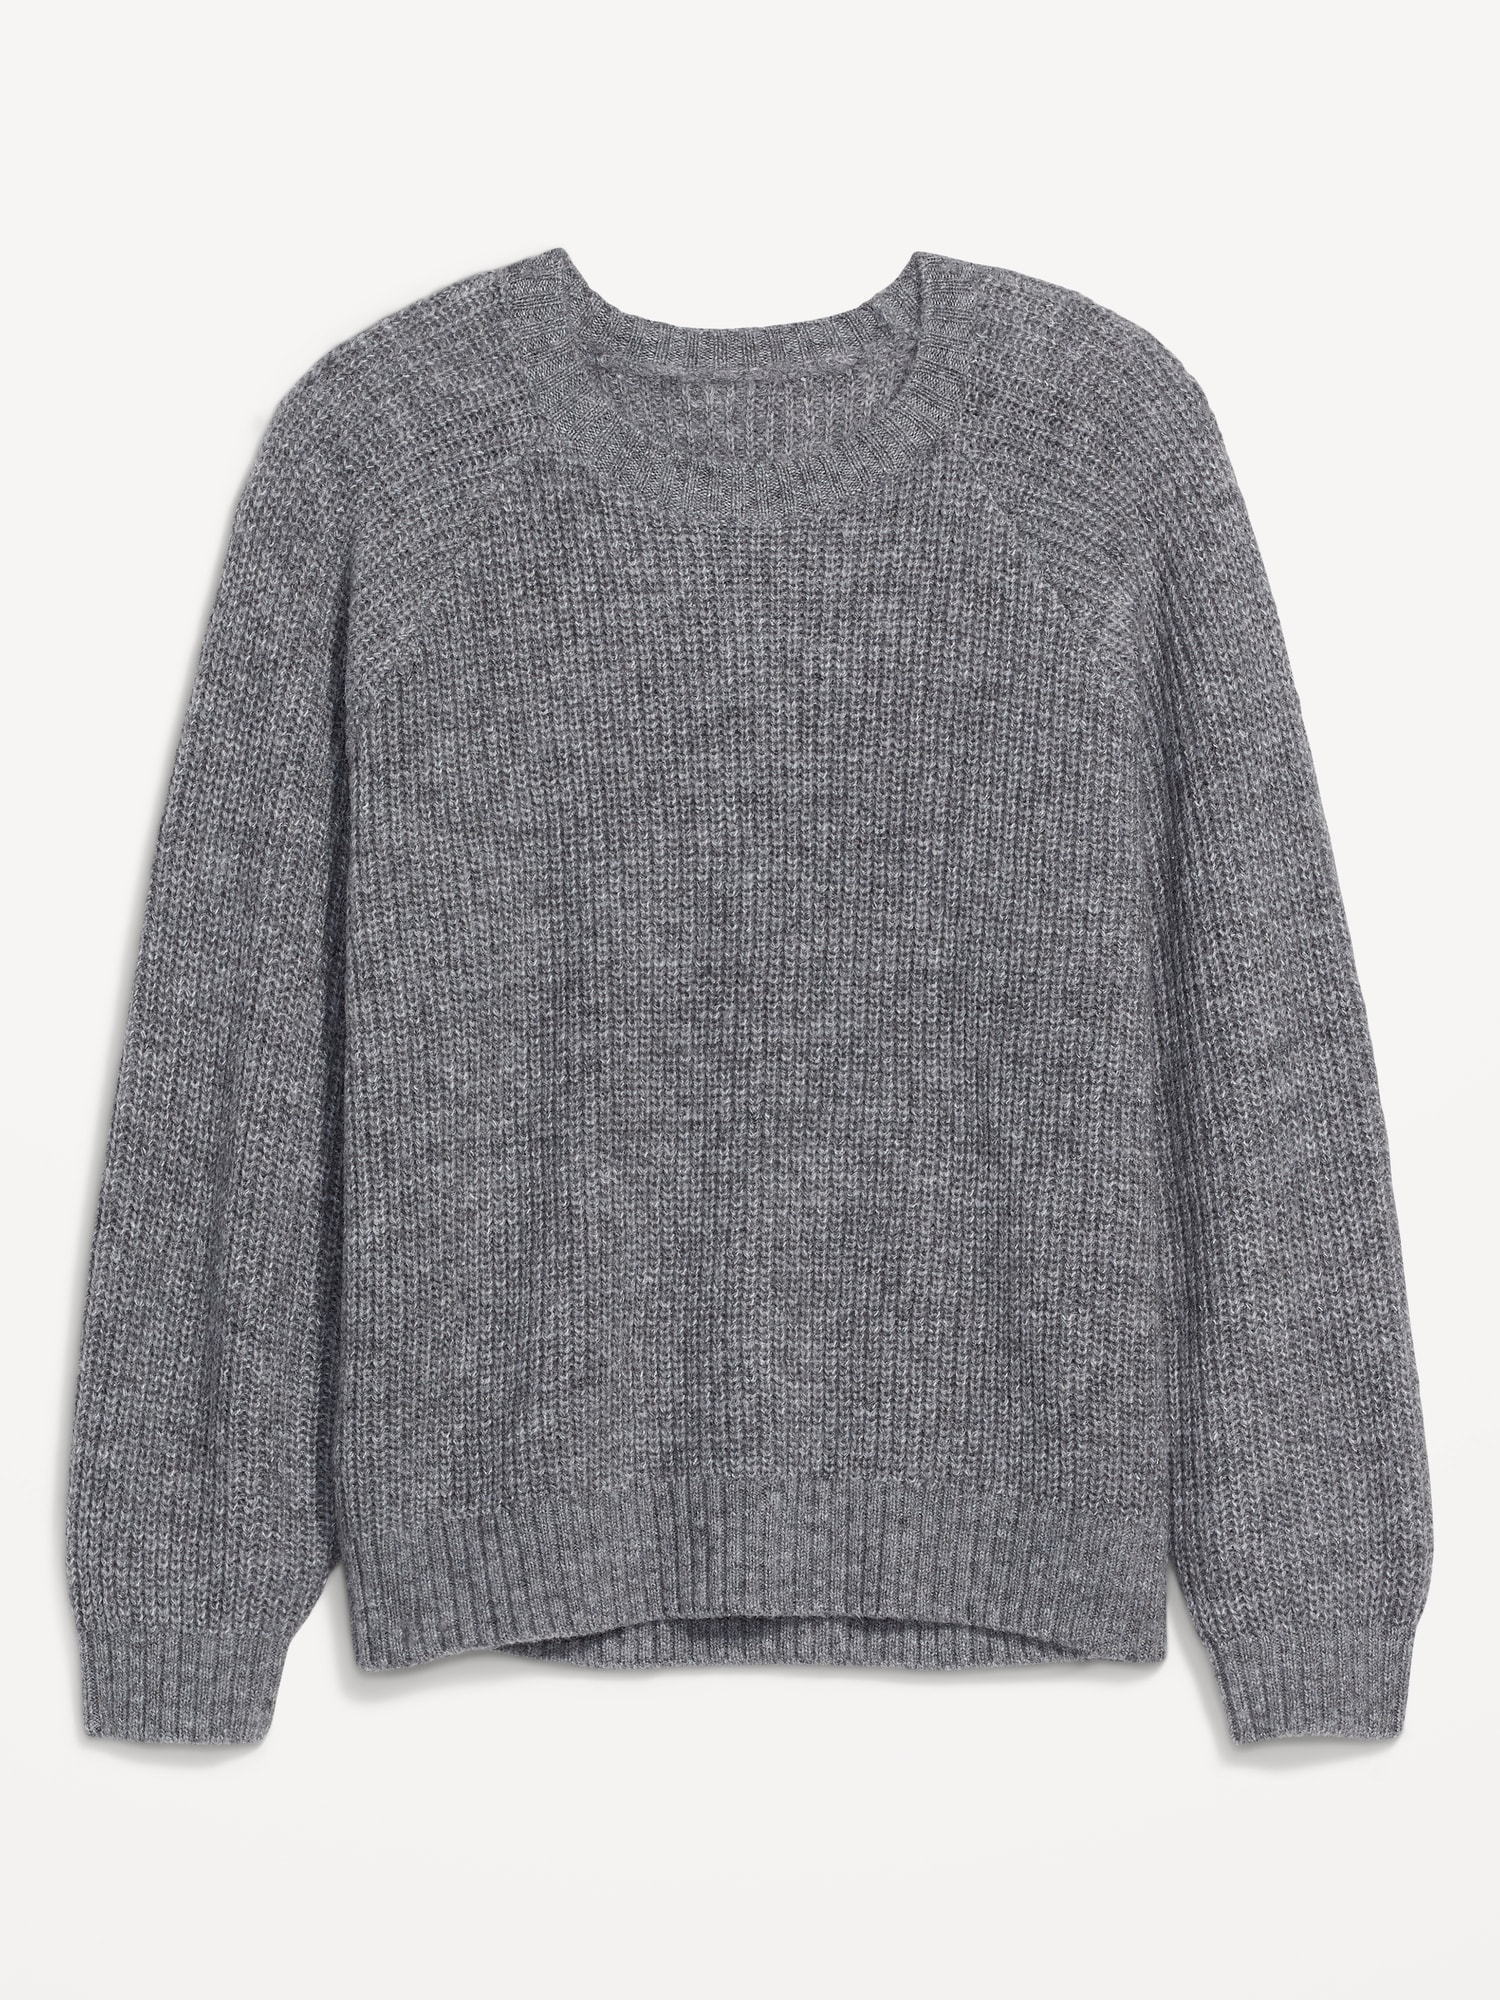 Heathered Cozy Shaker-Stitch Pullover Sweater for Women | Old Navy